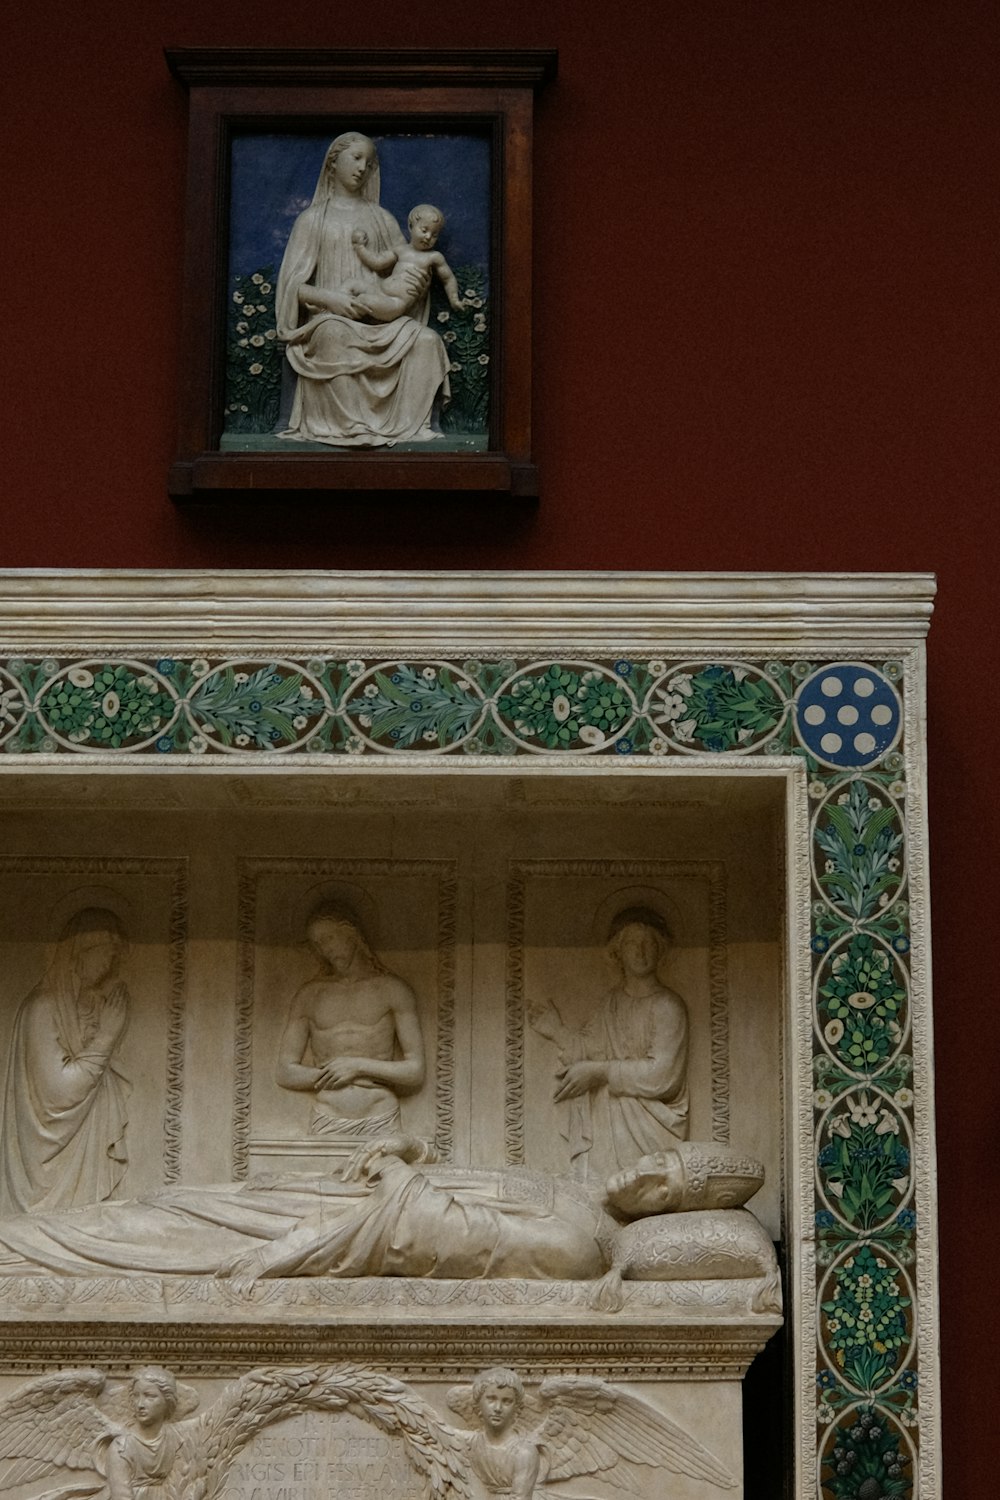 a statue of a woman laying on a bed